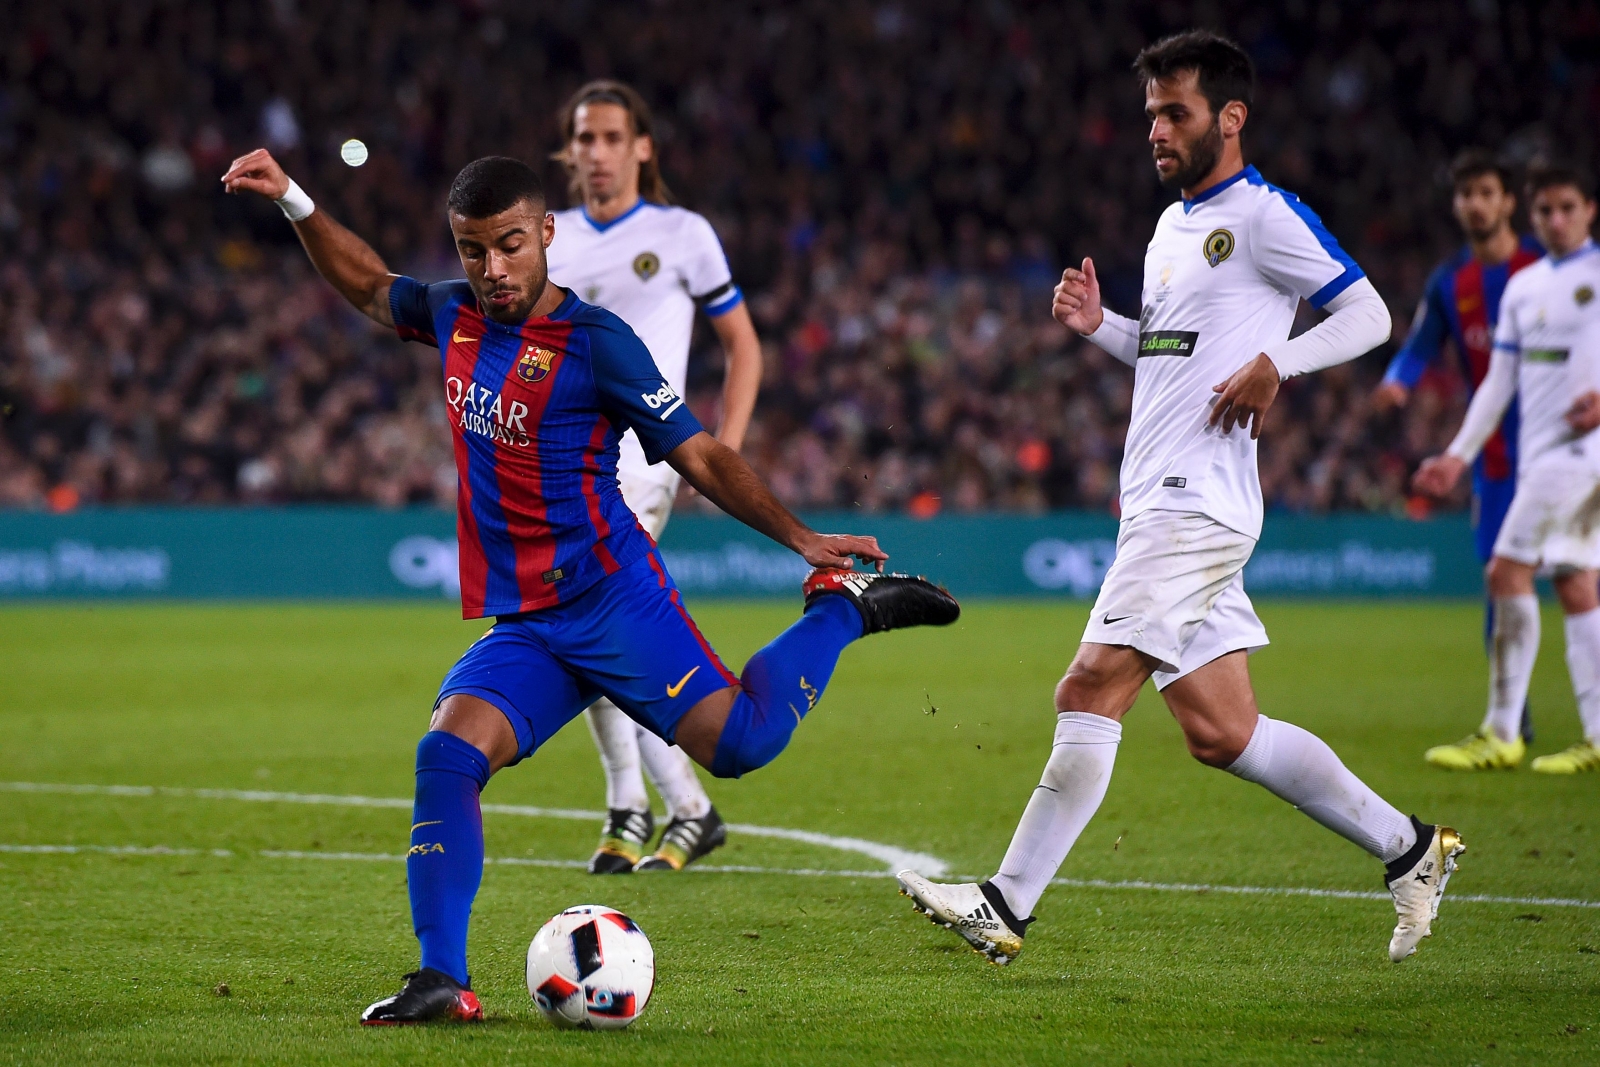 Barcelona midfielder Rafinha ruled out for four weeks with knee injury